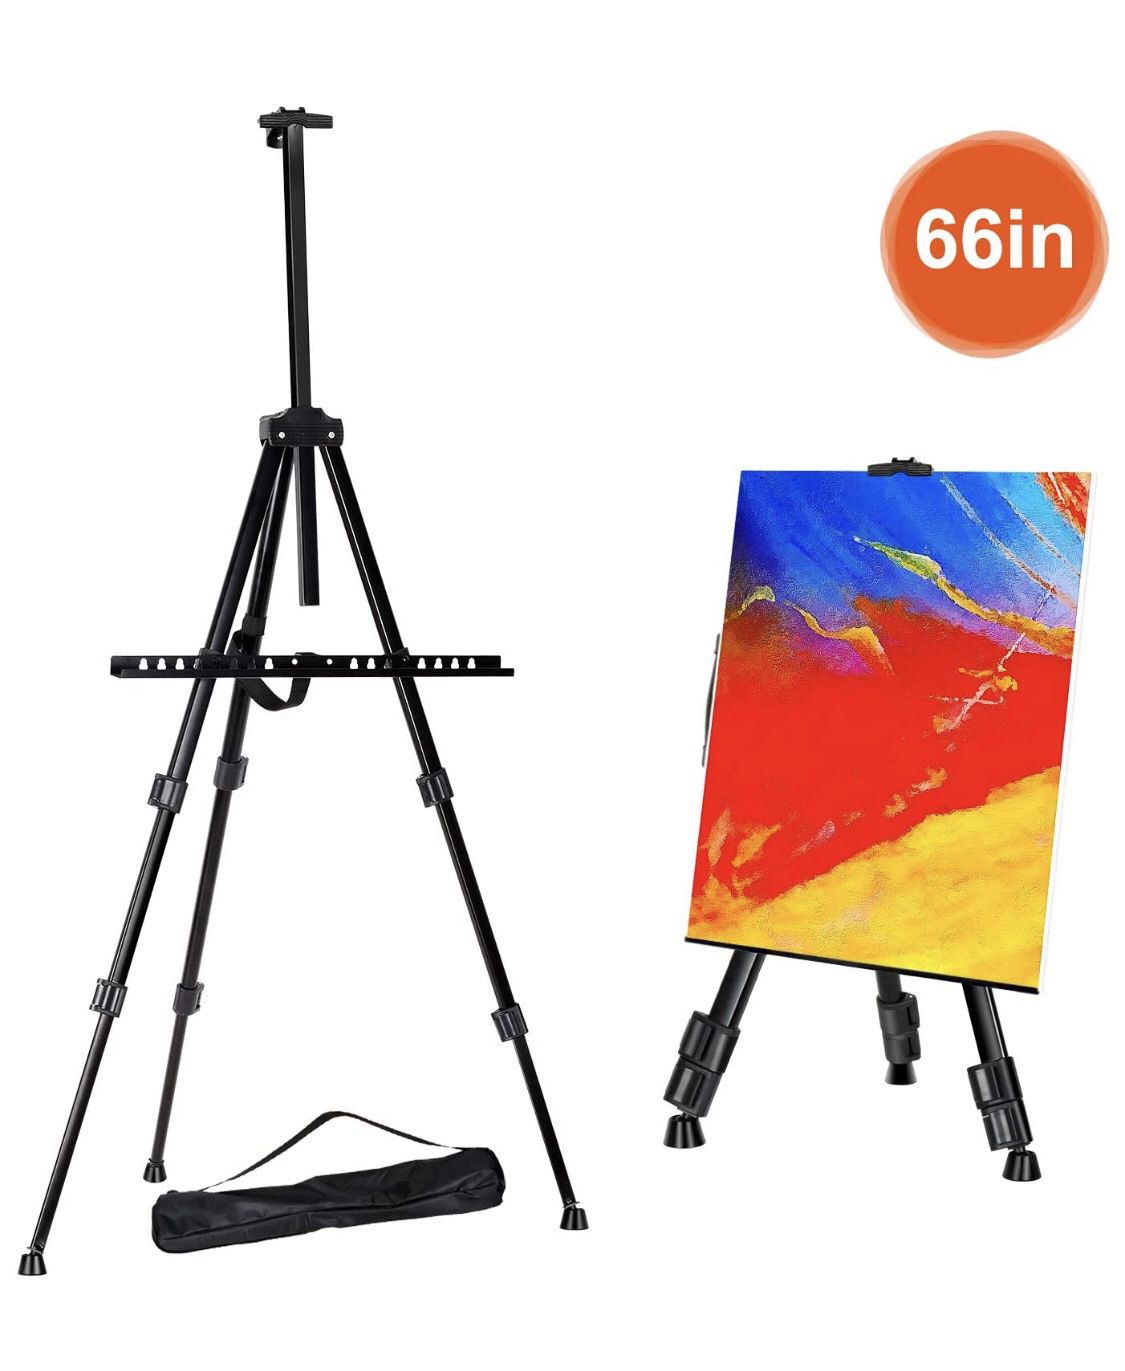 Easel Artist Easel Tripod with Portable Bag Adjustable Height from 21" to 66" for Table-Top/Floor Painting,Displaying,Drawing